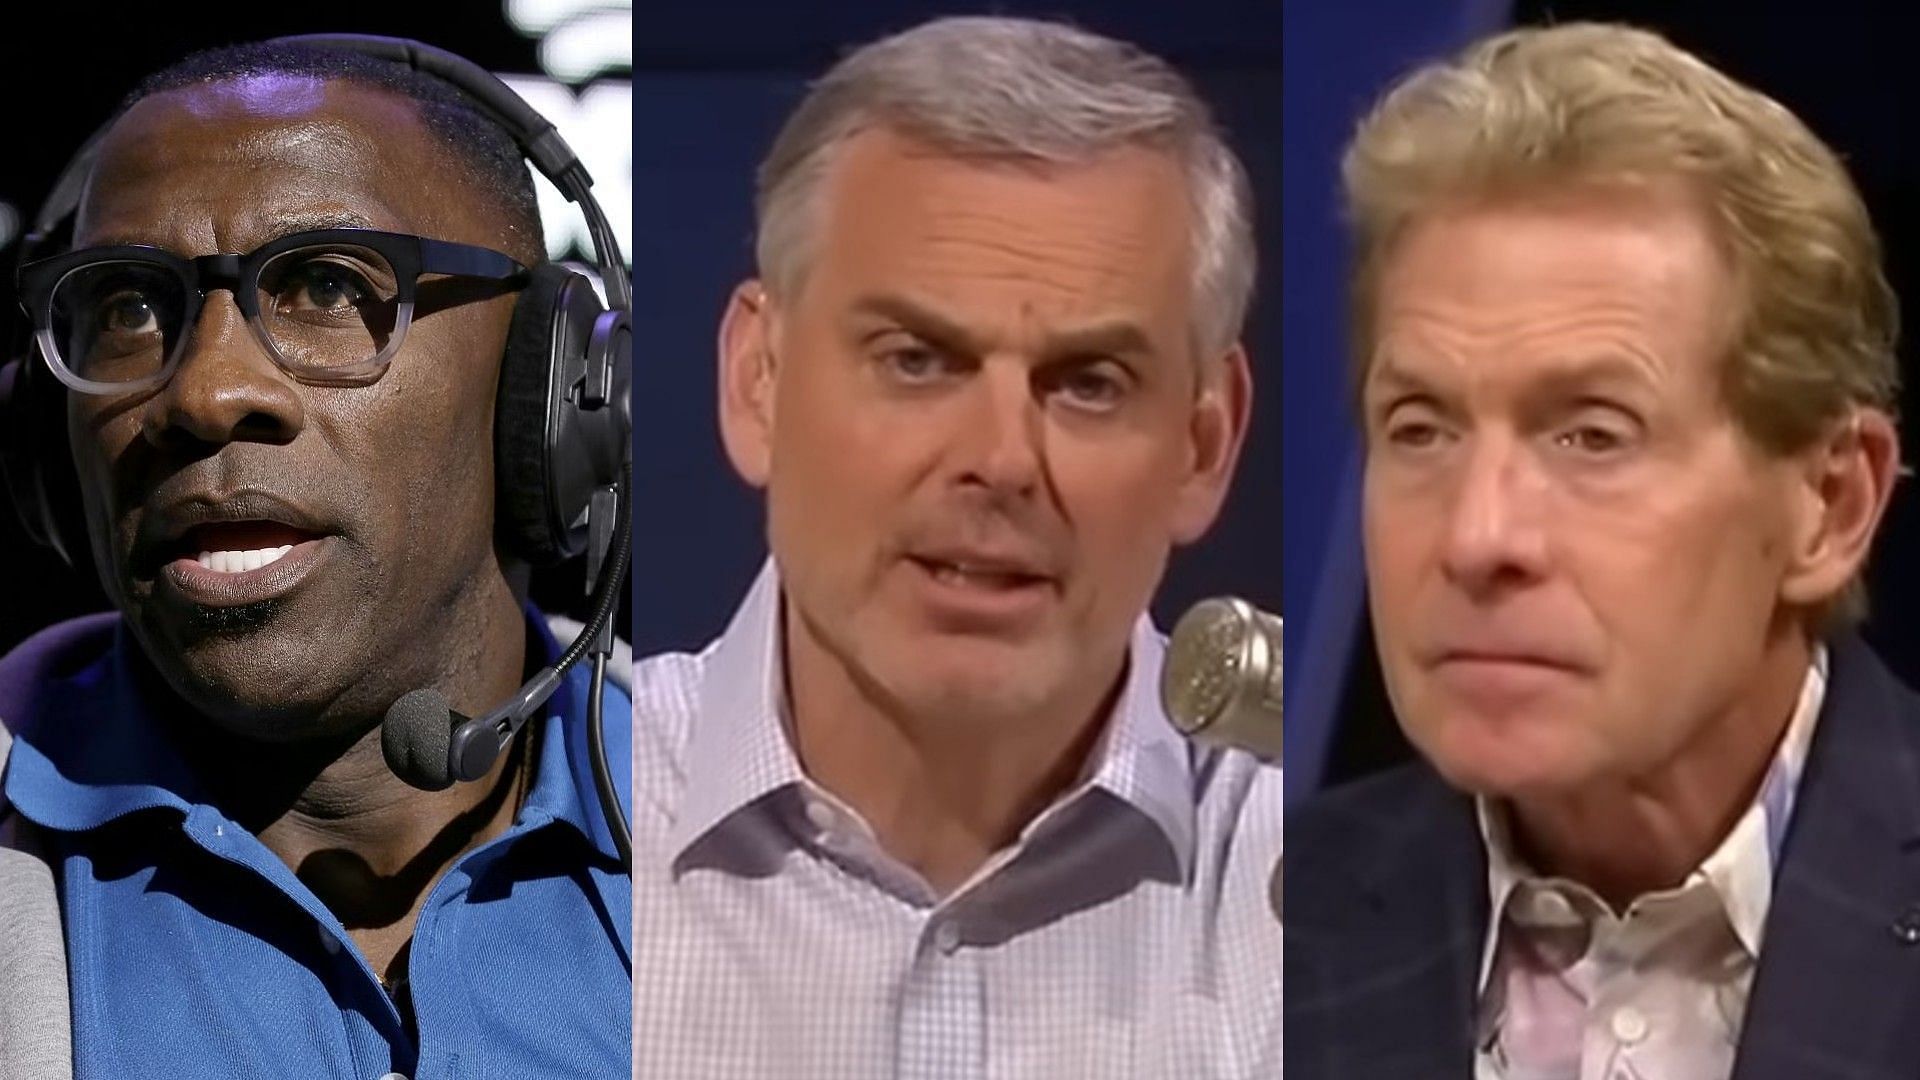 Shannon Sharpe and Skip Bayless were doomed, claims Colin Cowherd - Courtesy of Undisputed and the Herd with Colin Cowherd on YouTube